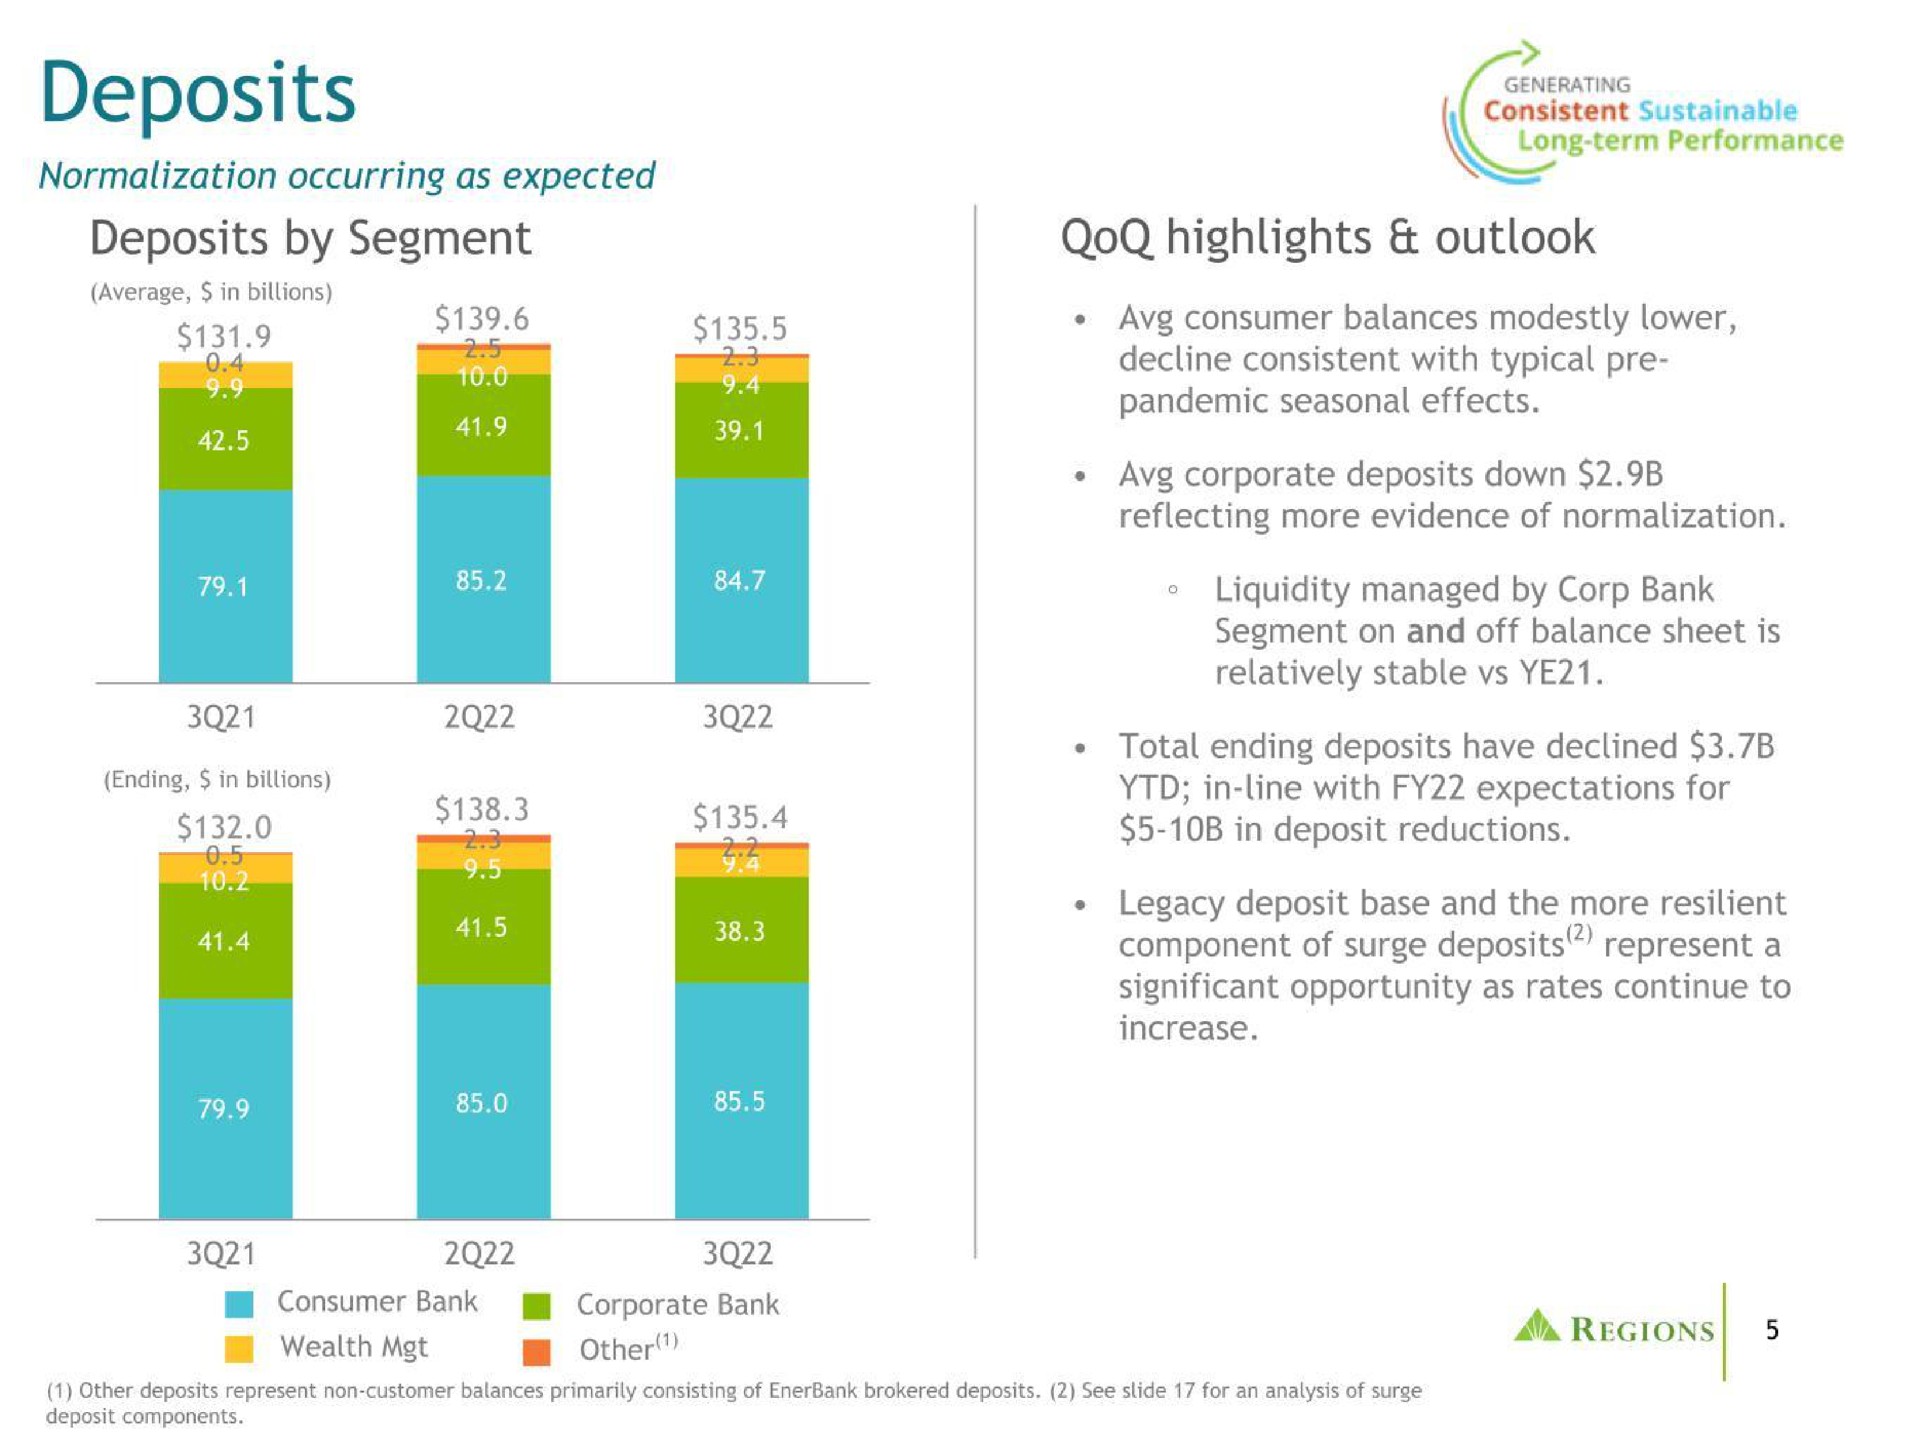 deposits by segment highlights outlook in deposit reductions | Regions Financial Corporation